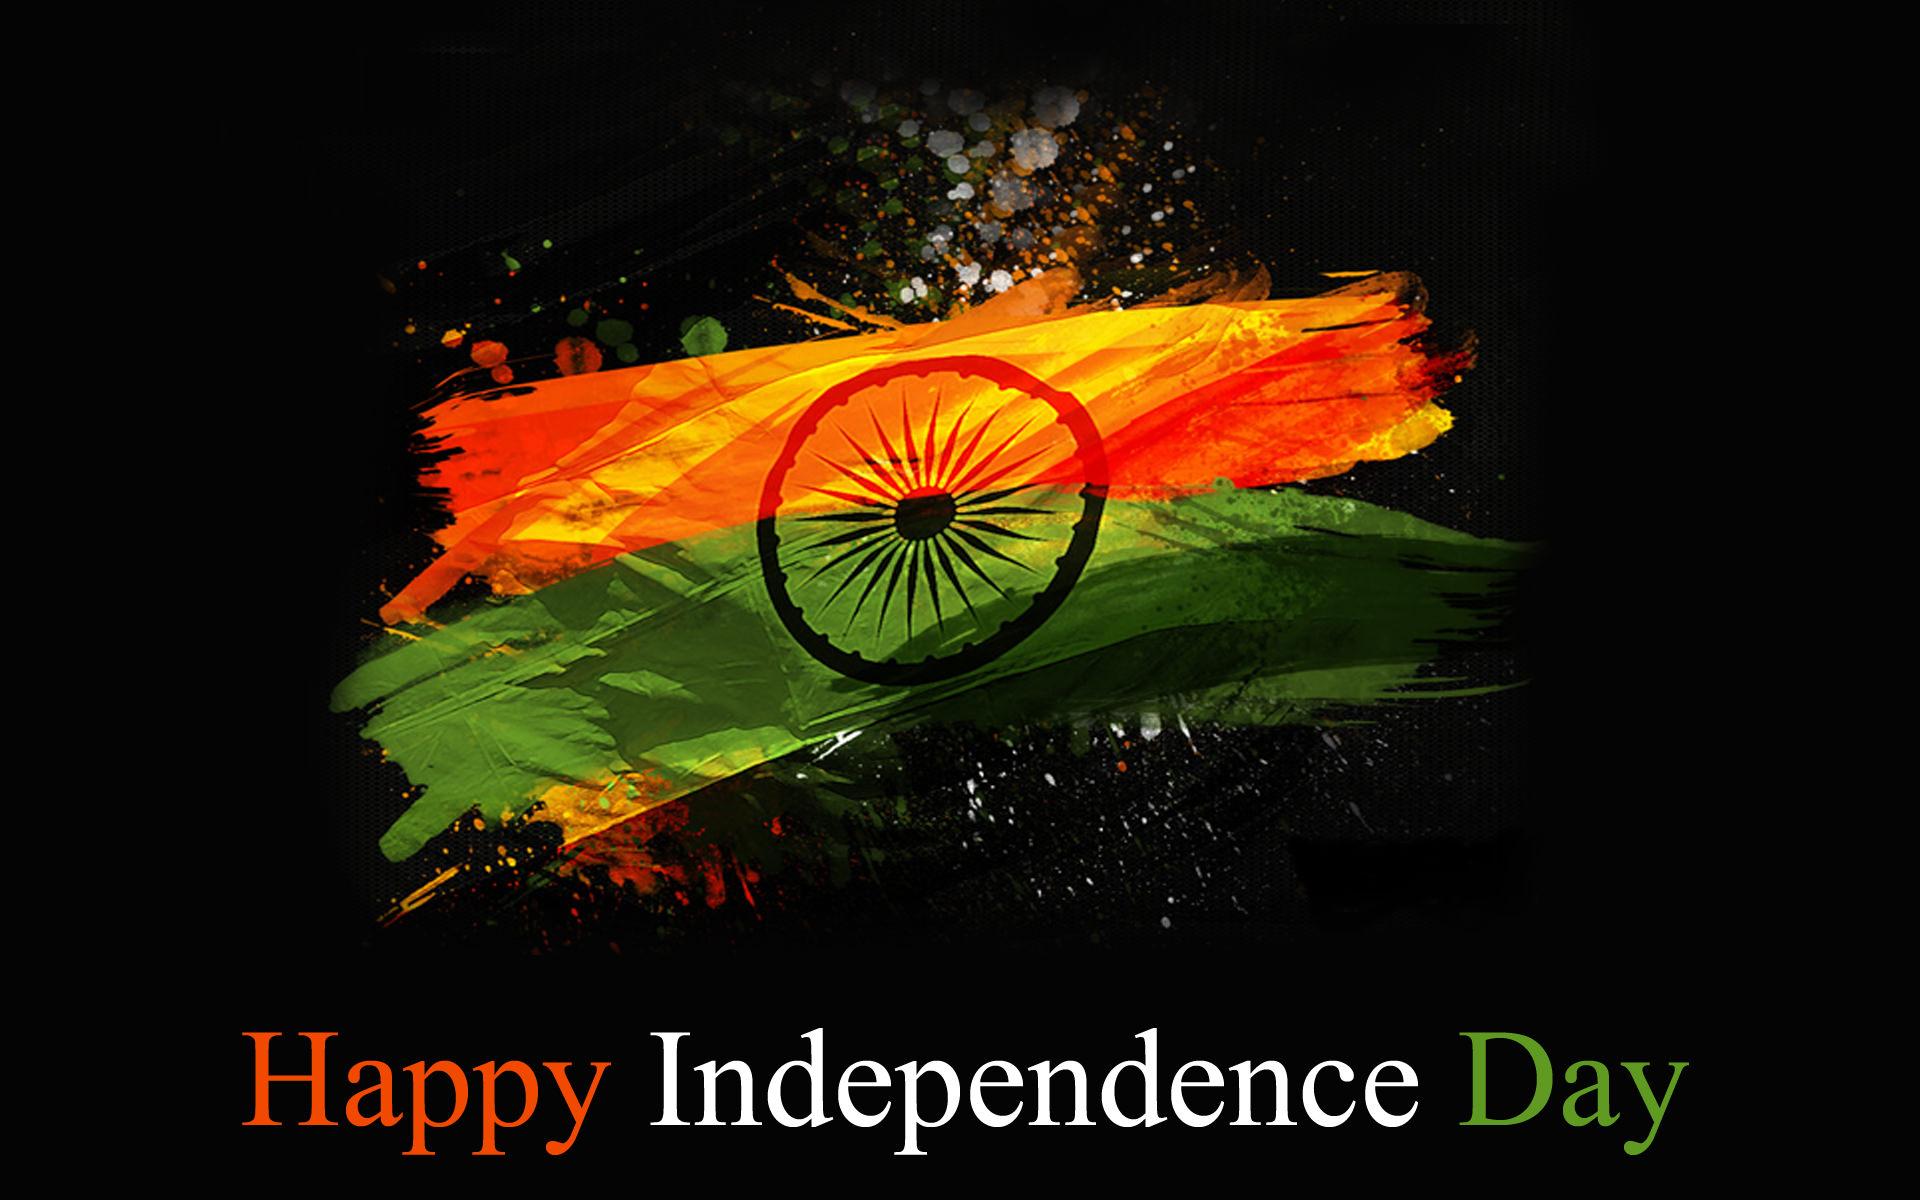 Happy Independence Day 2018 Image Wallpaper photo Status Quotes